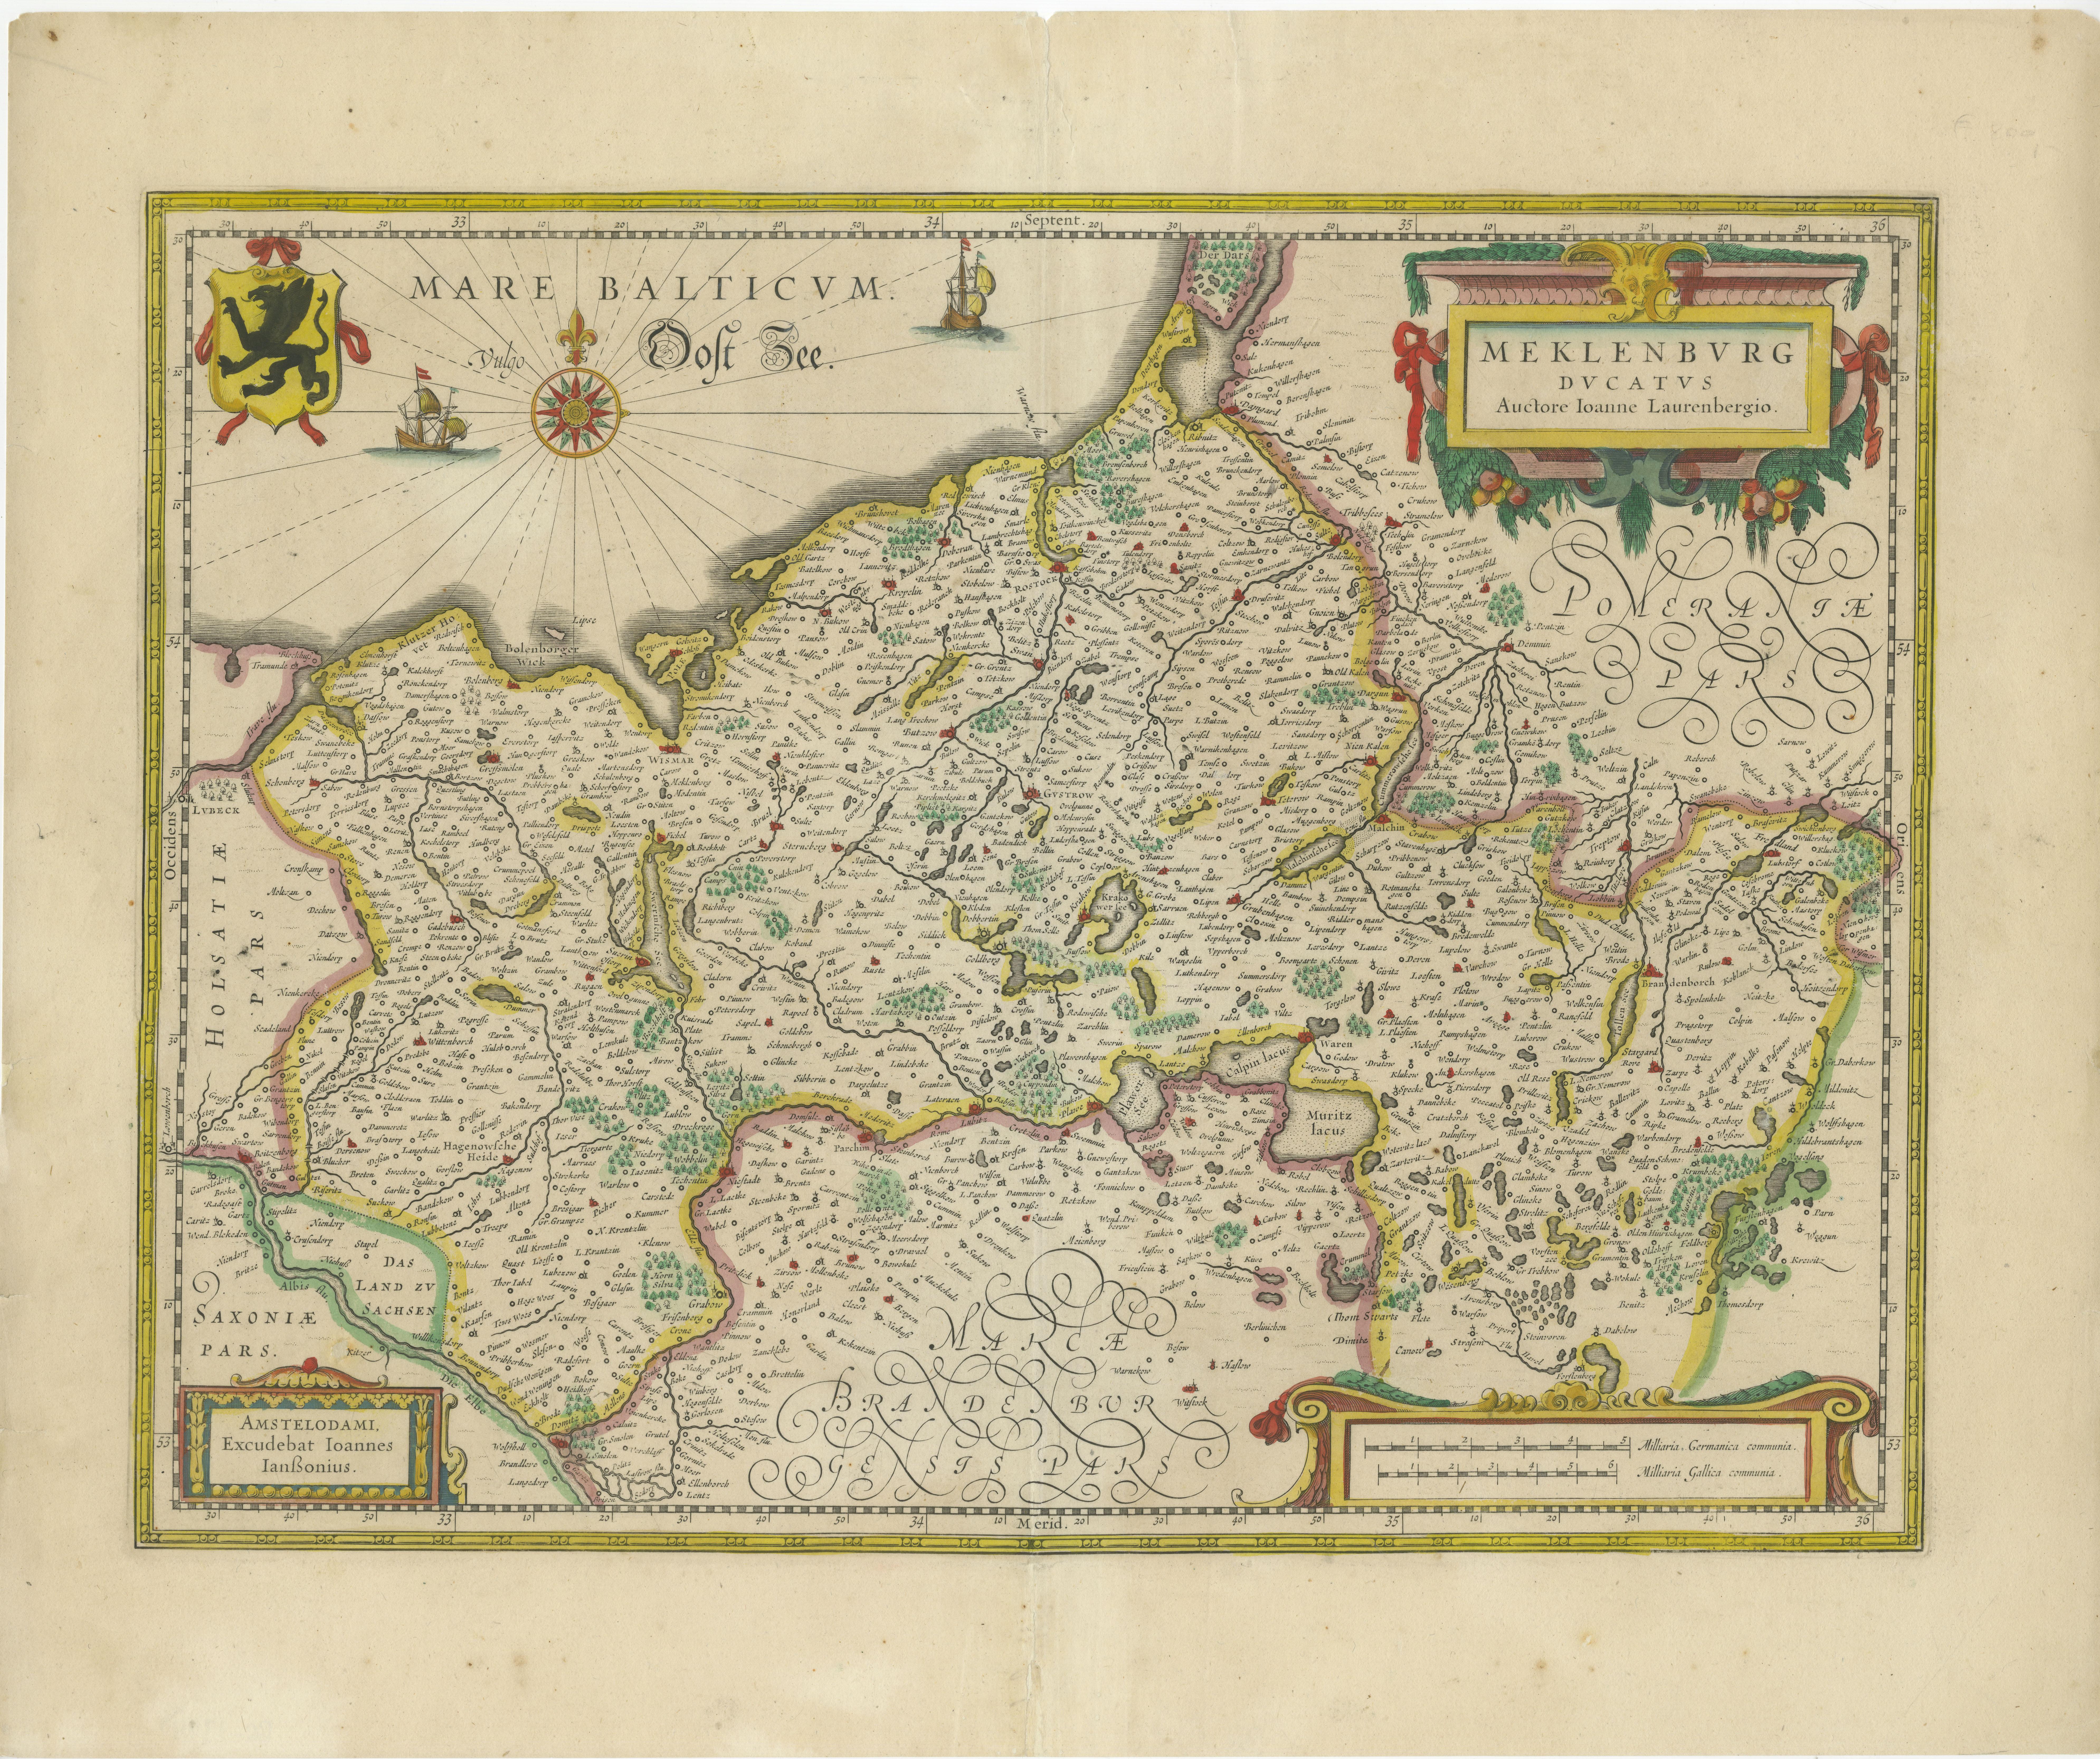 Antique map titled 'Meklenburg Ducatus'. Attractive map of northern Germany, showing the area of Mecklenburg-Vorpommern. Published by J. Janssonius, circa 1630. 

Jan Janssonius (also known as Johann or Jan Jansson or Janszoon) (1588-1664) was a